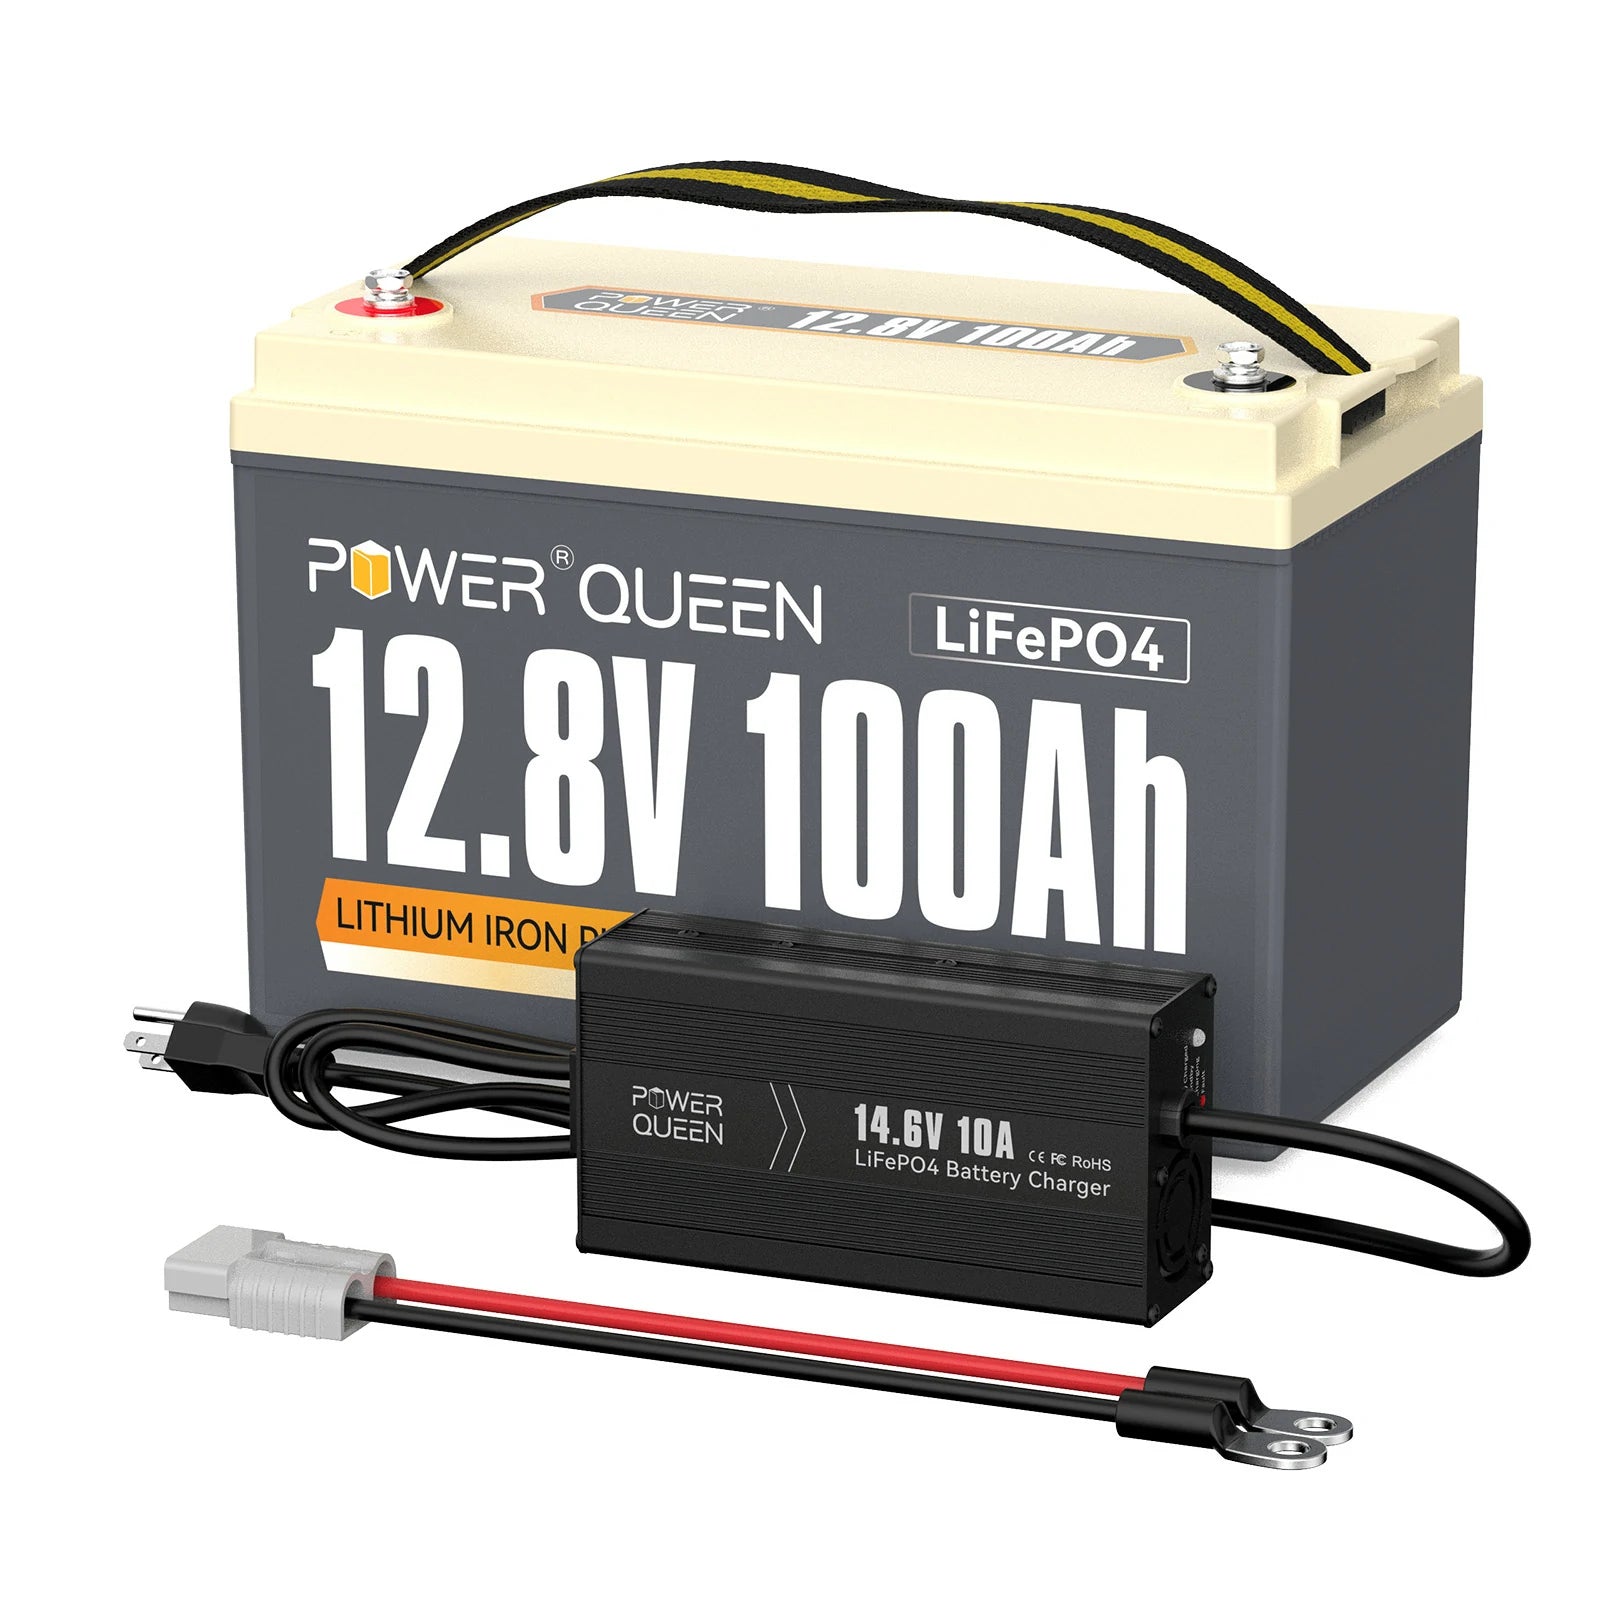     Power-Queen-12V-100Ah-LiFePO4-Battery-Canada-with-10A-LiFePO4-Battery-Charger-for-12V-LiFePO4-Battery